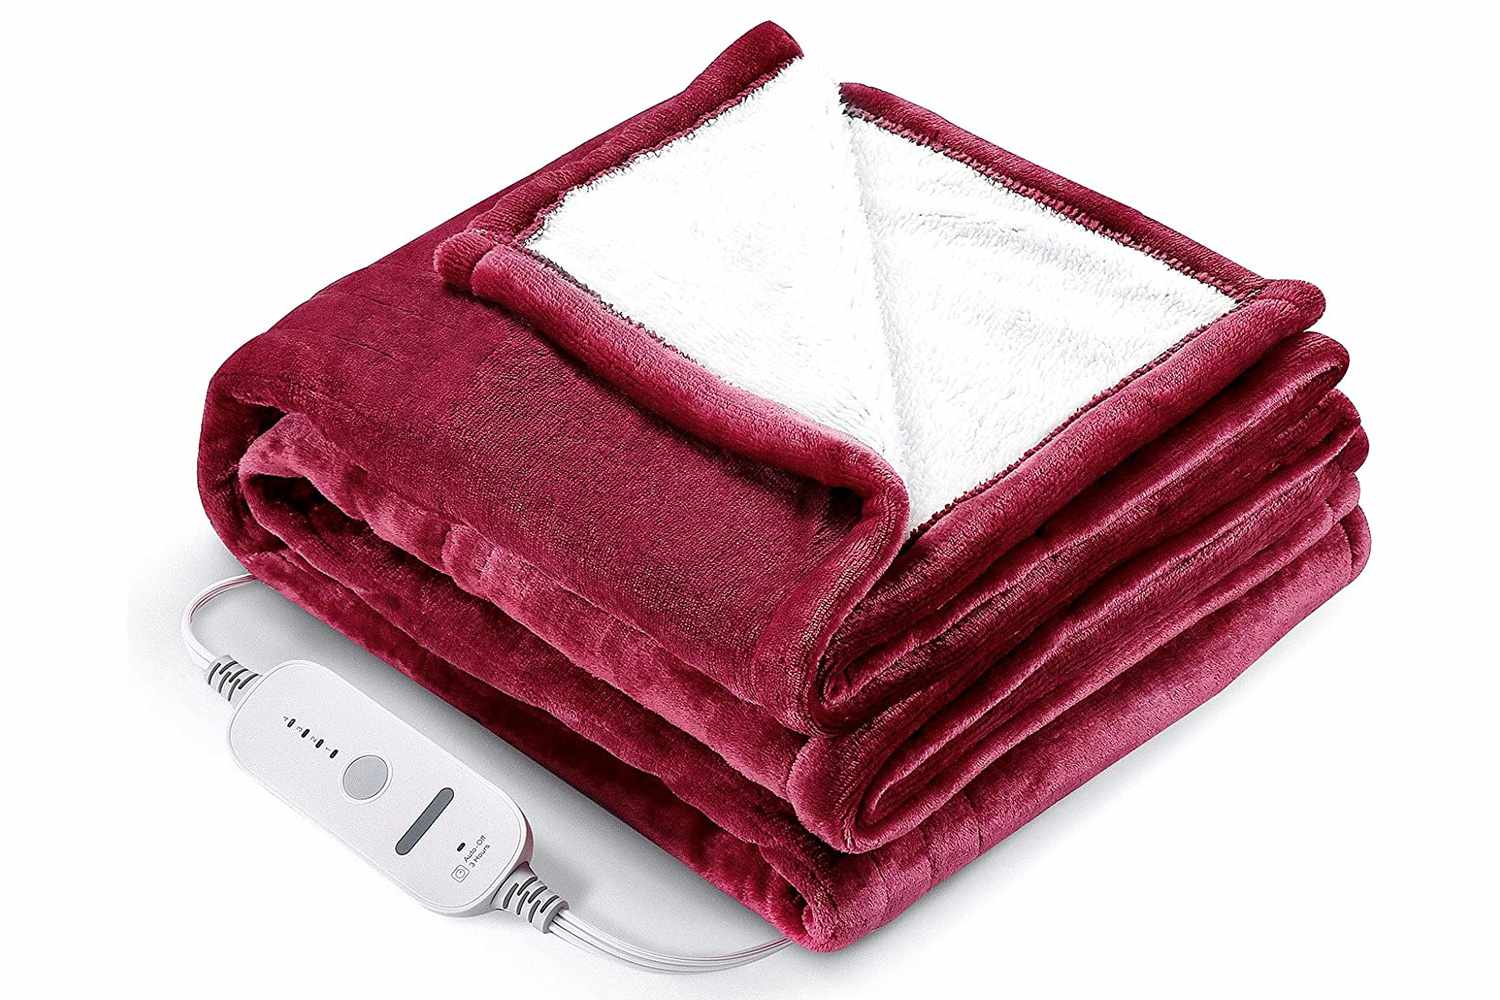 Amazon CureCure Heated Throw Blanket folded and displayed on a solid white background